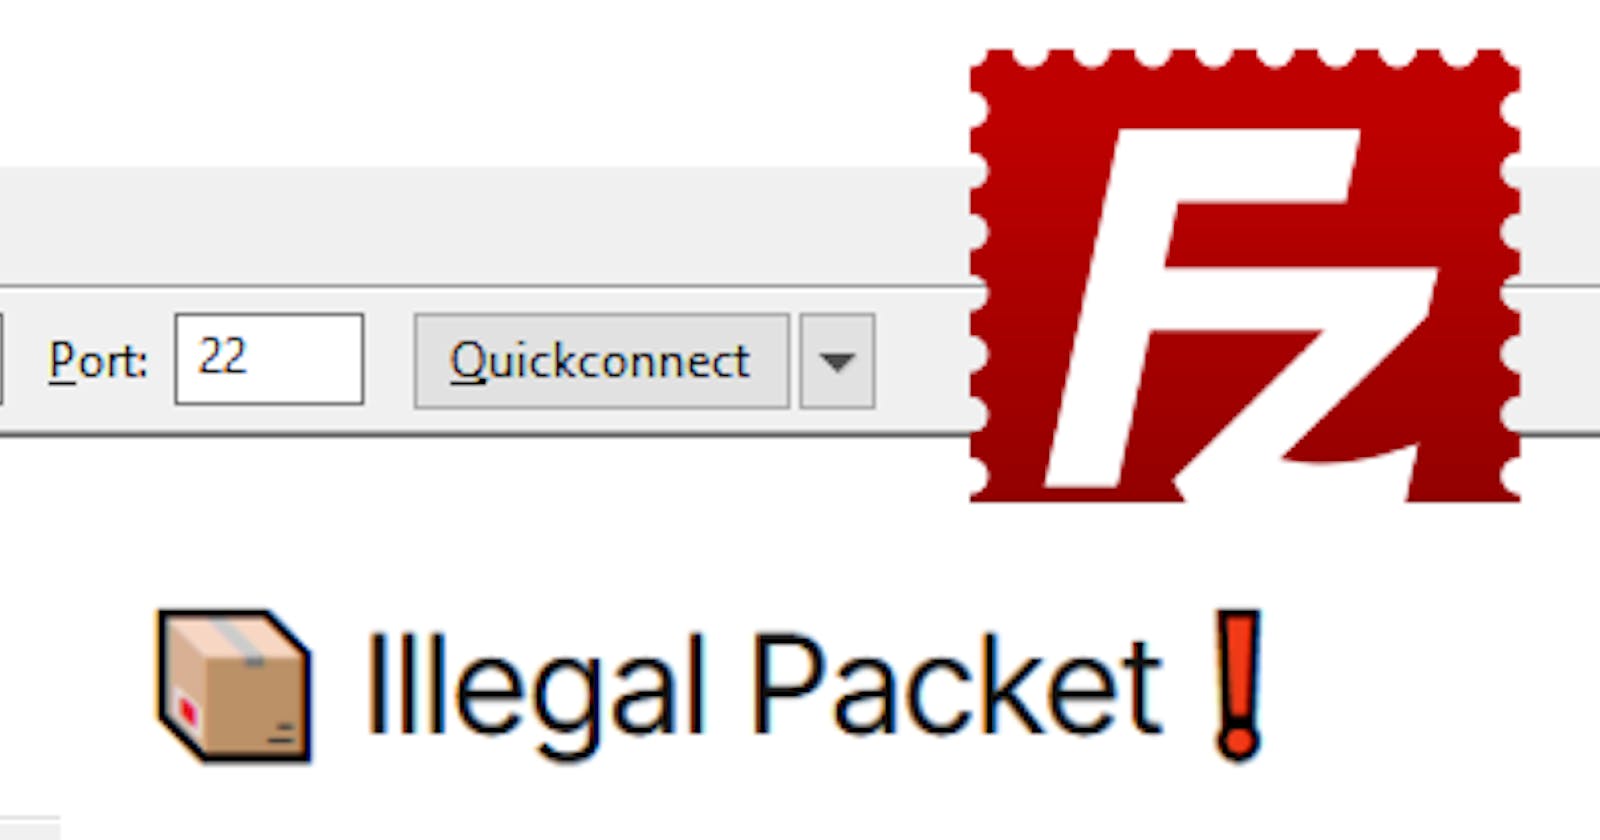 FileZilla - How to solve error: A packet with illegal or unsupported version was received.